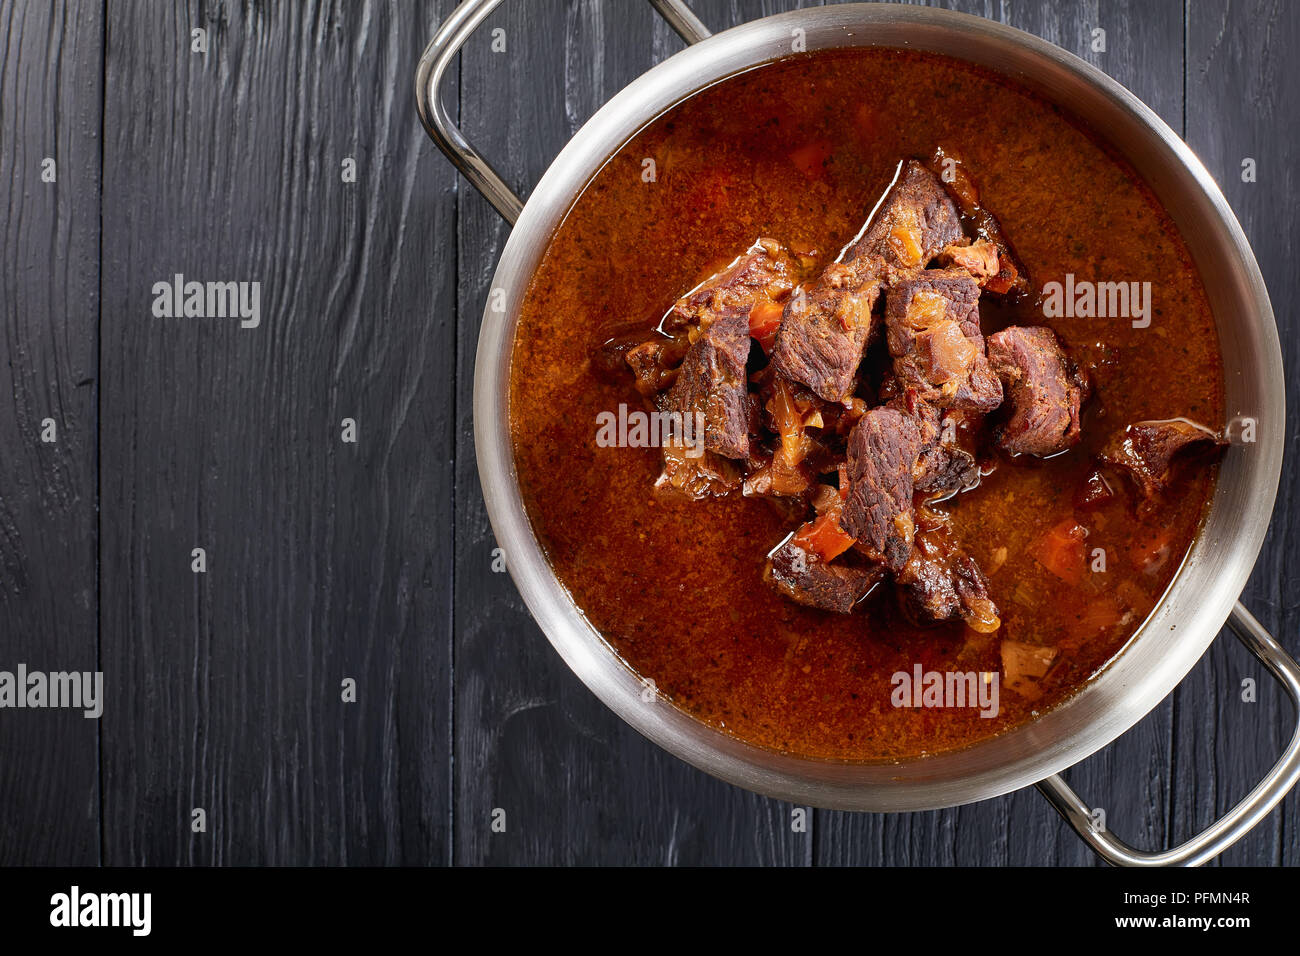 homemade hot Czech beef goulash in a stainless pan on black wooden table, view from above, close-up Stock Photo